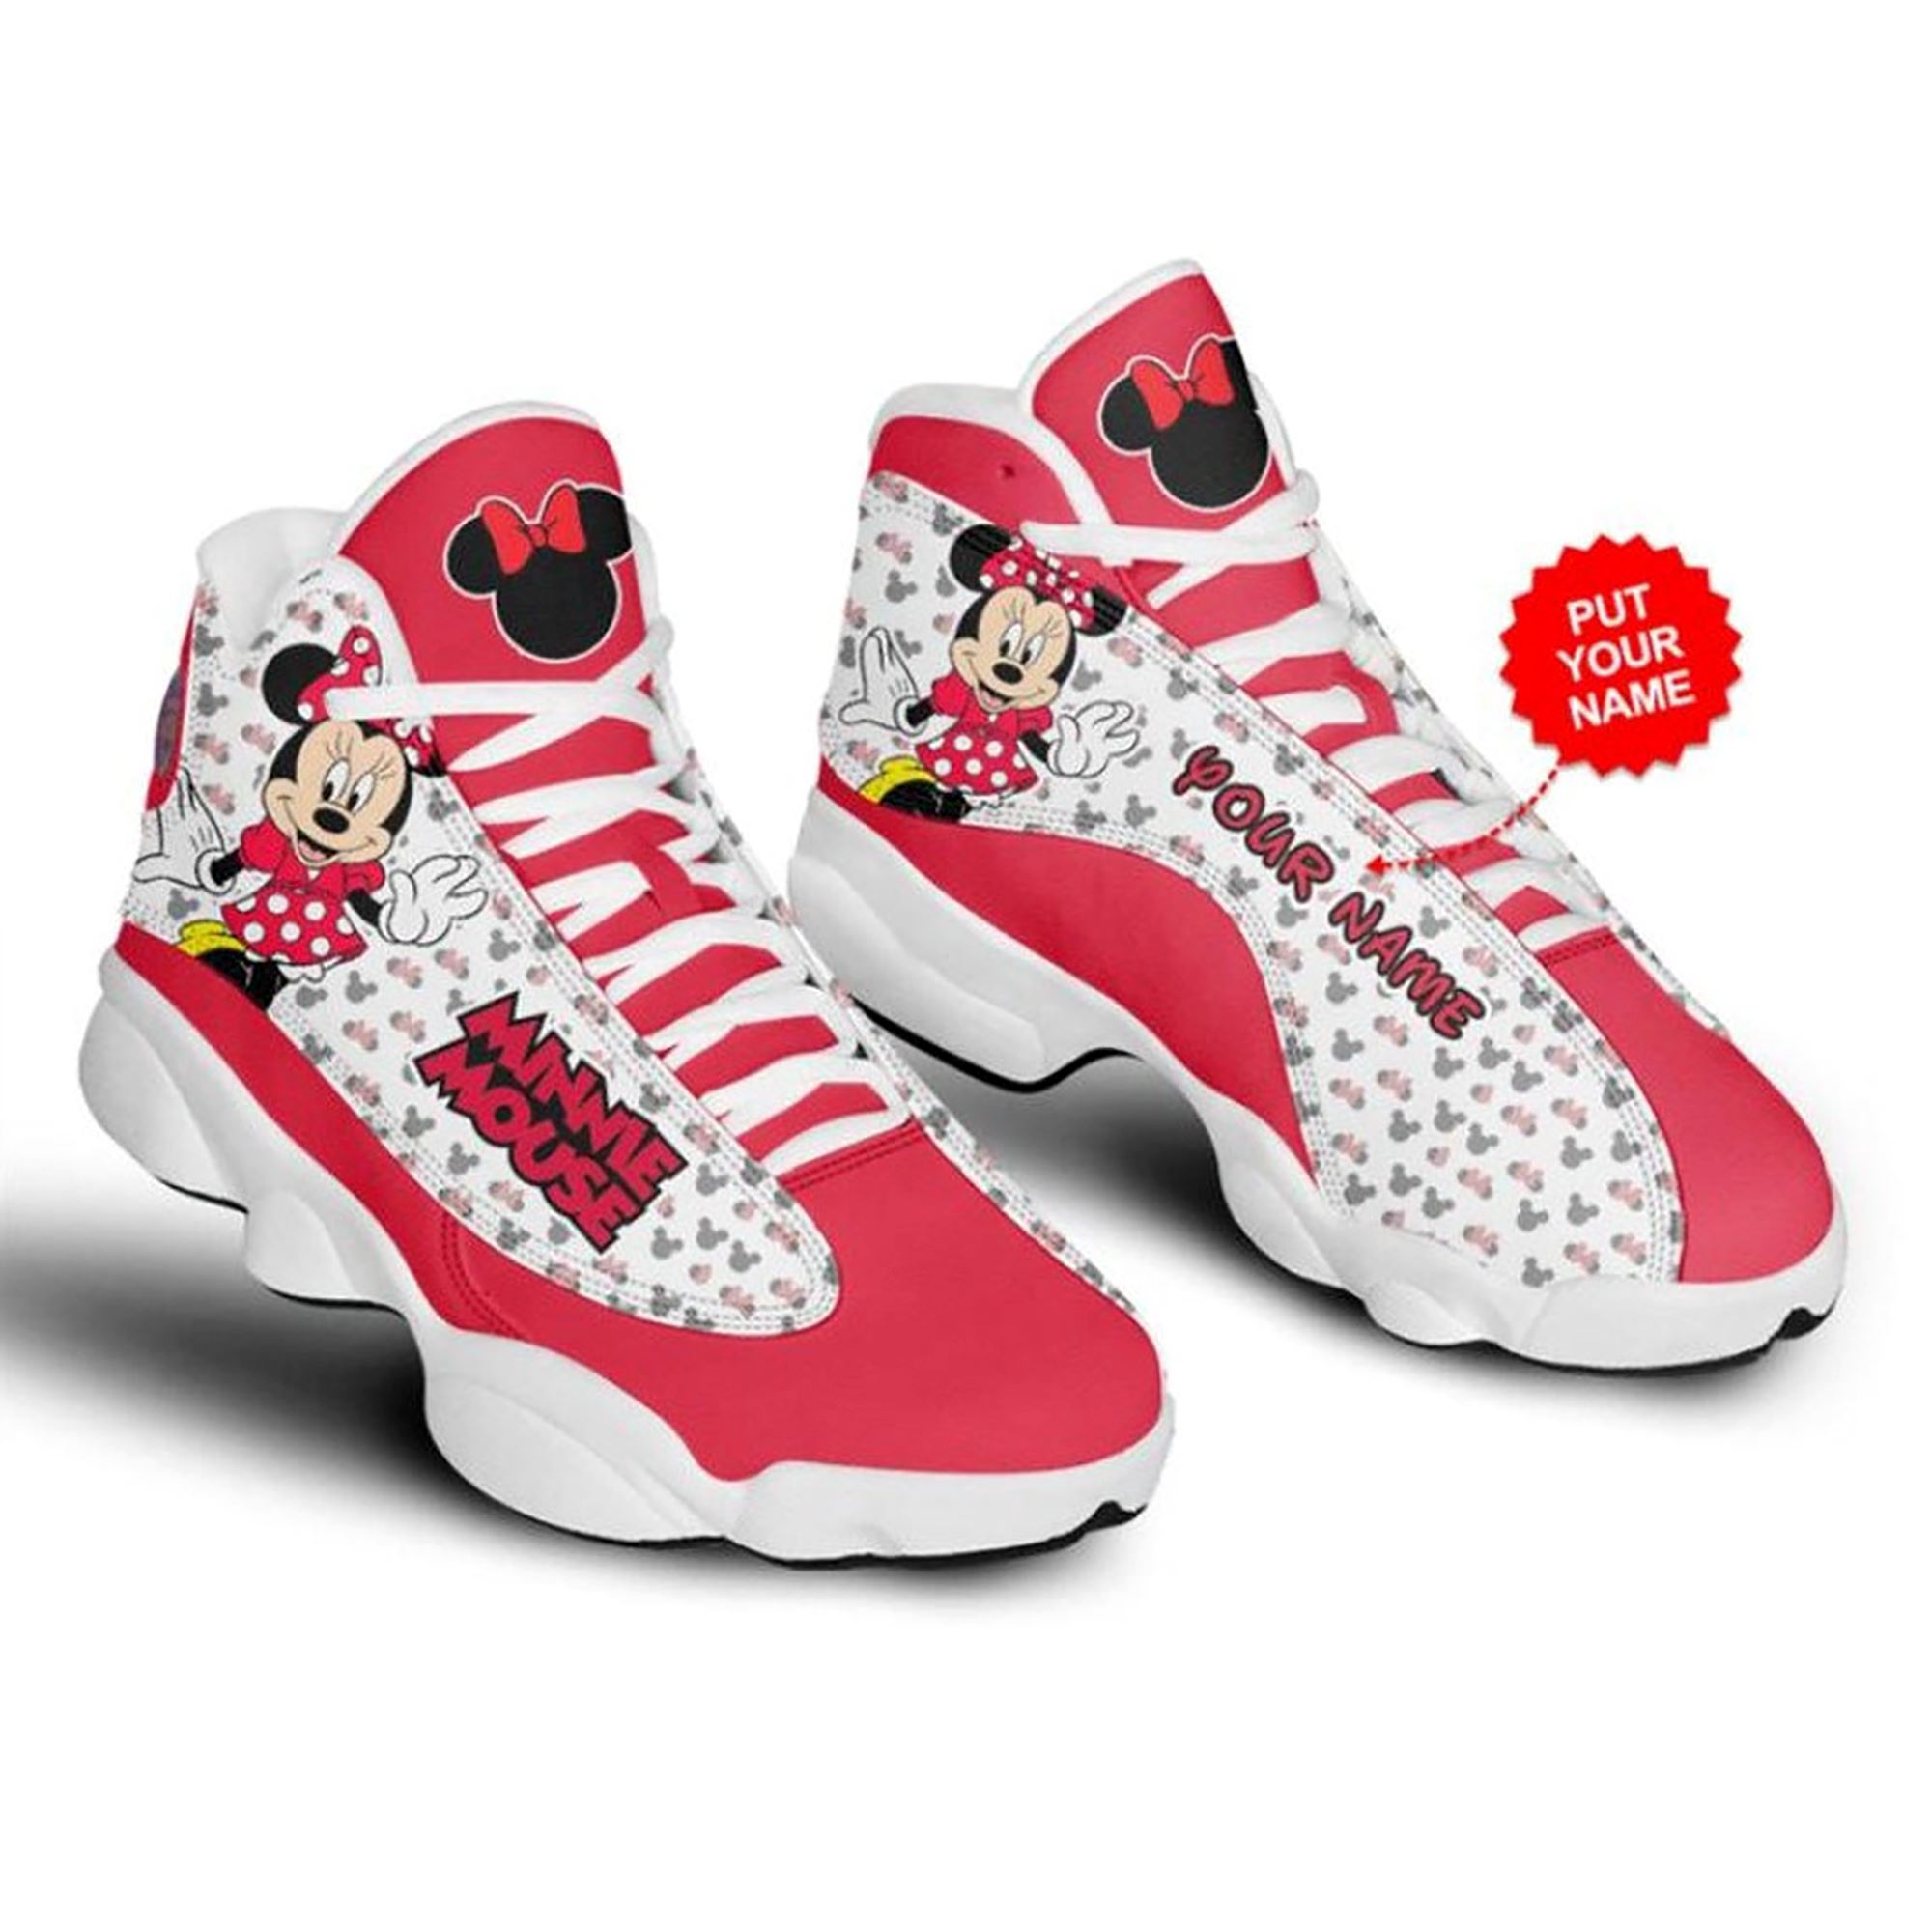 Personalized Minnie Mouse Air Jordan 13 Shoes Minnie Mouse Shoes Custom Name Shoes Disney Sneakers Minnie Mouse Leather Shoes